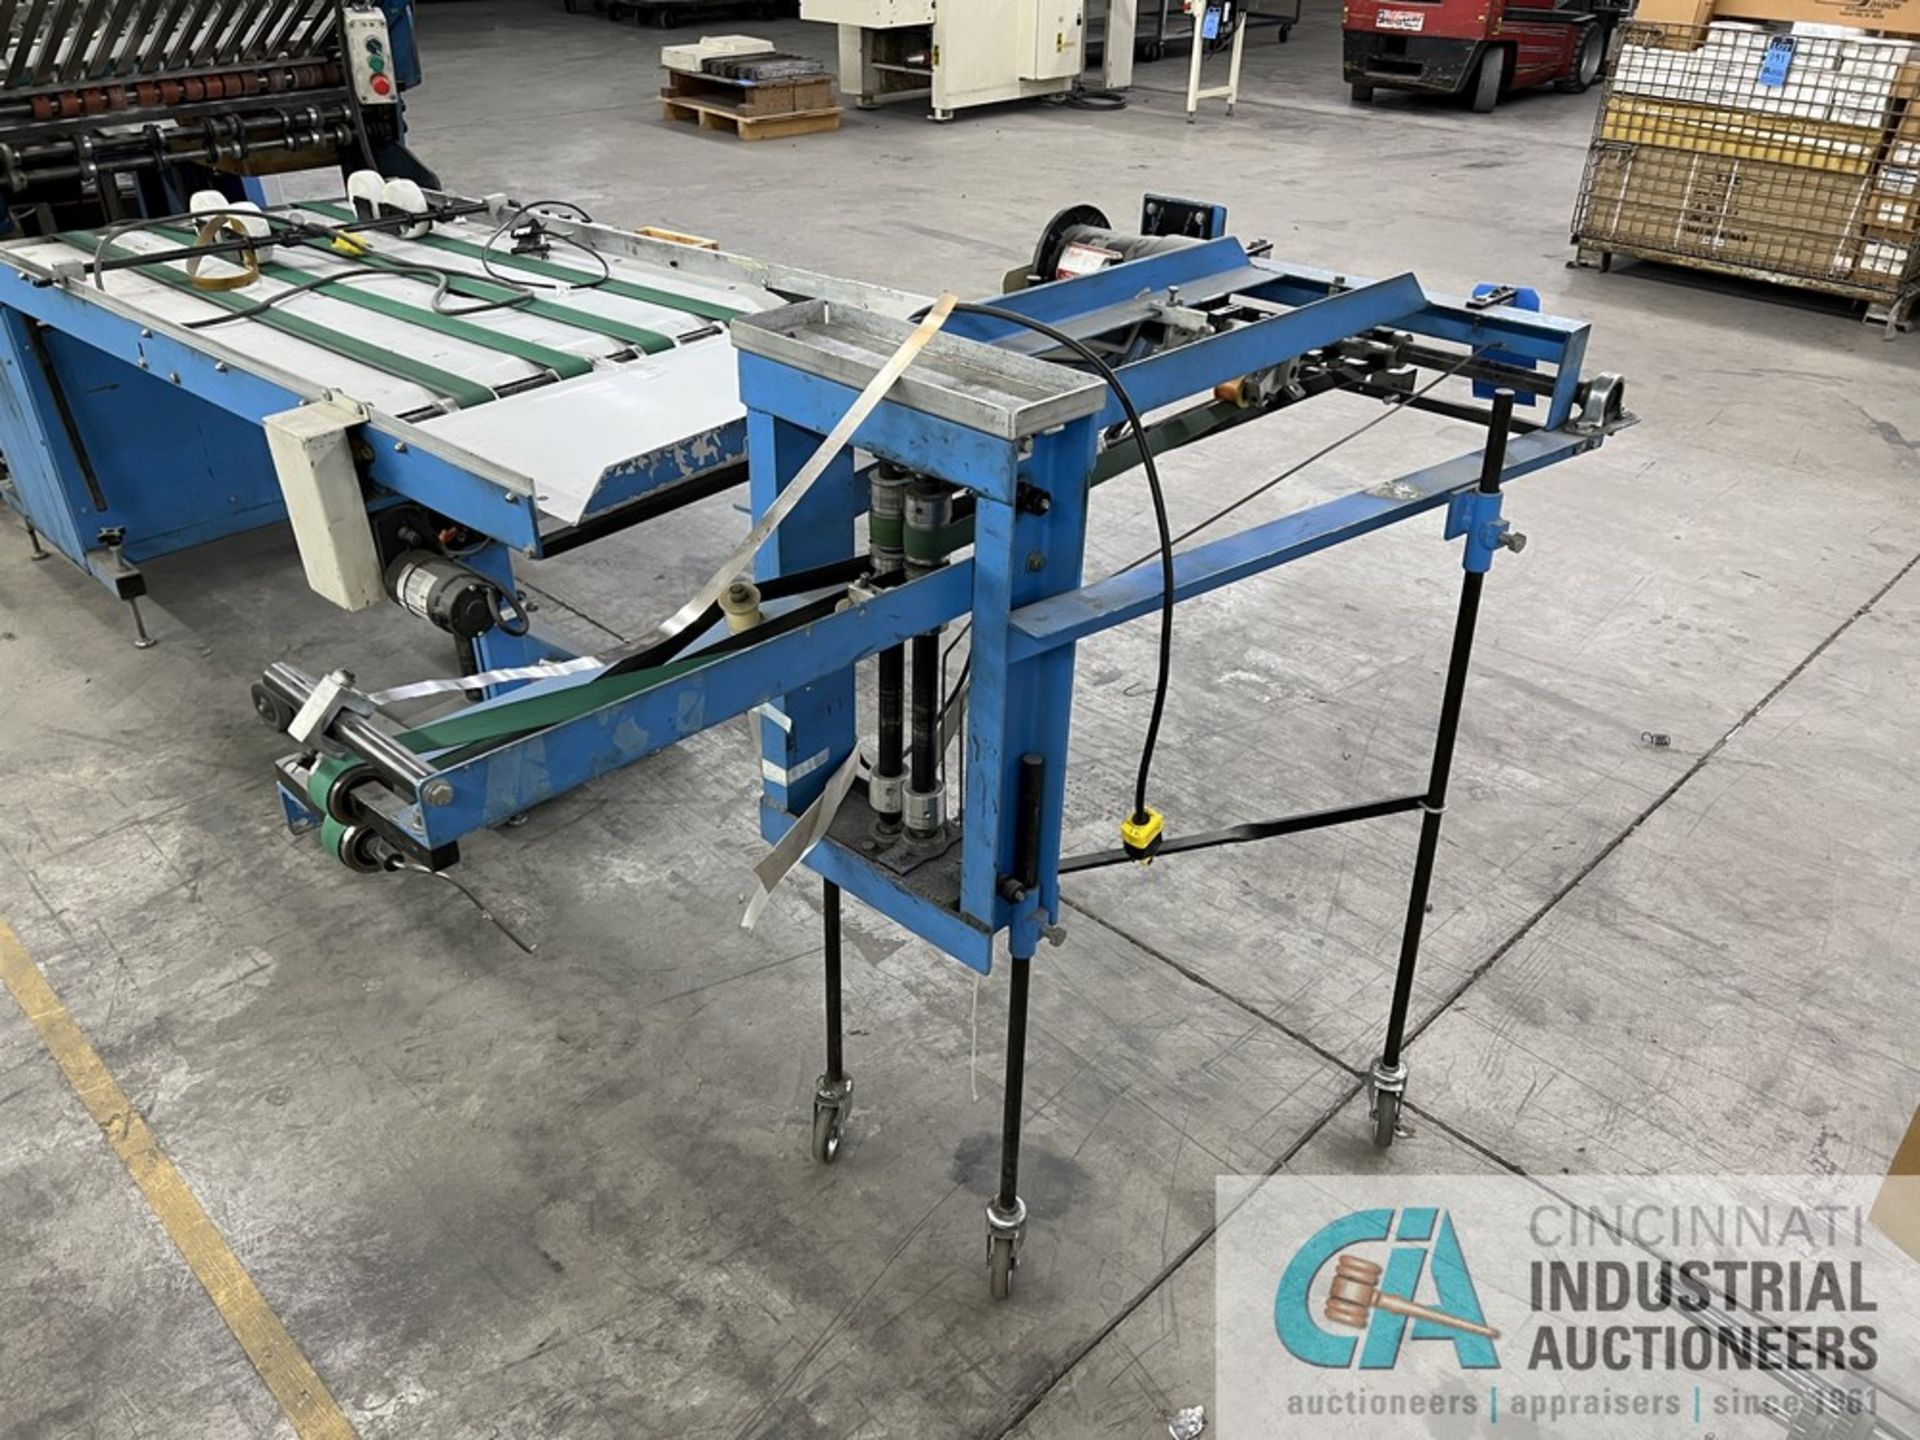 HASKINS UNIFOLD FOLDER / GLUER; S/N 9011, 2003 VS10S OUNATEC GLUER, OY2008 CONTROLLER WITH (3) - Image 15 of 25